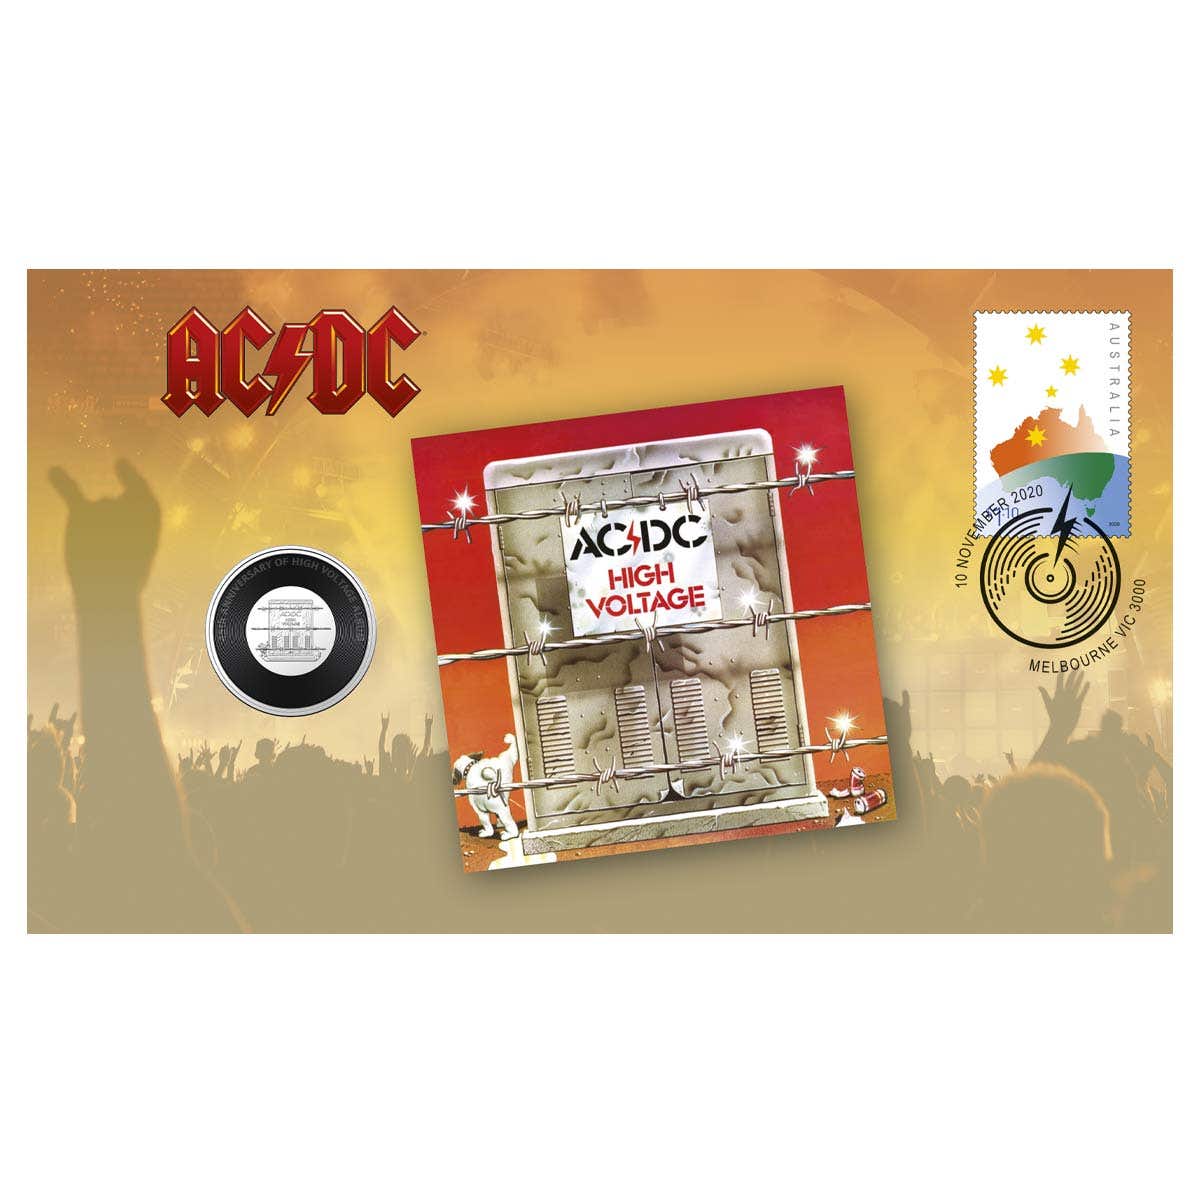 AC/DC High Voltage 2020 20c Coin & Stamp Cover